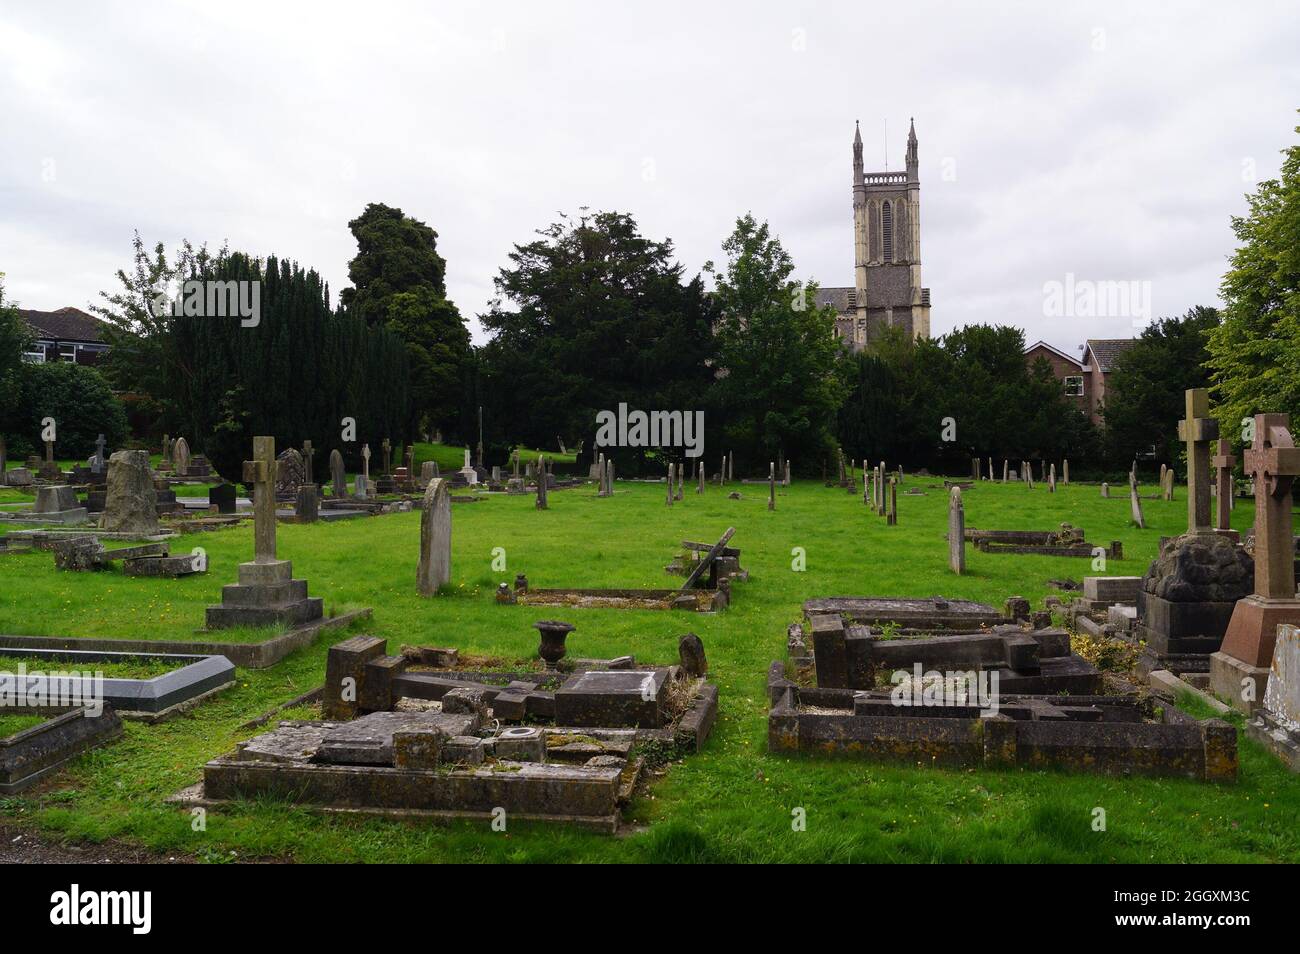 A view of St Mary's Parish Church and graveyard in Andover, Hampshire (UK) Stock Photo